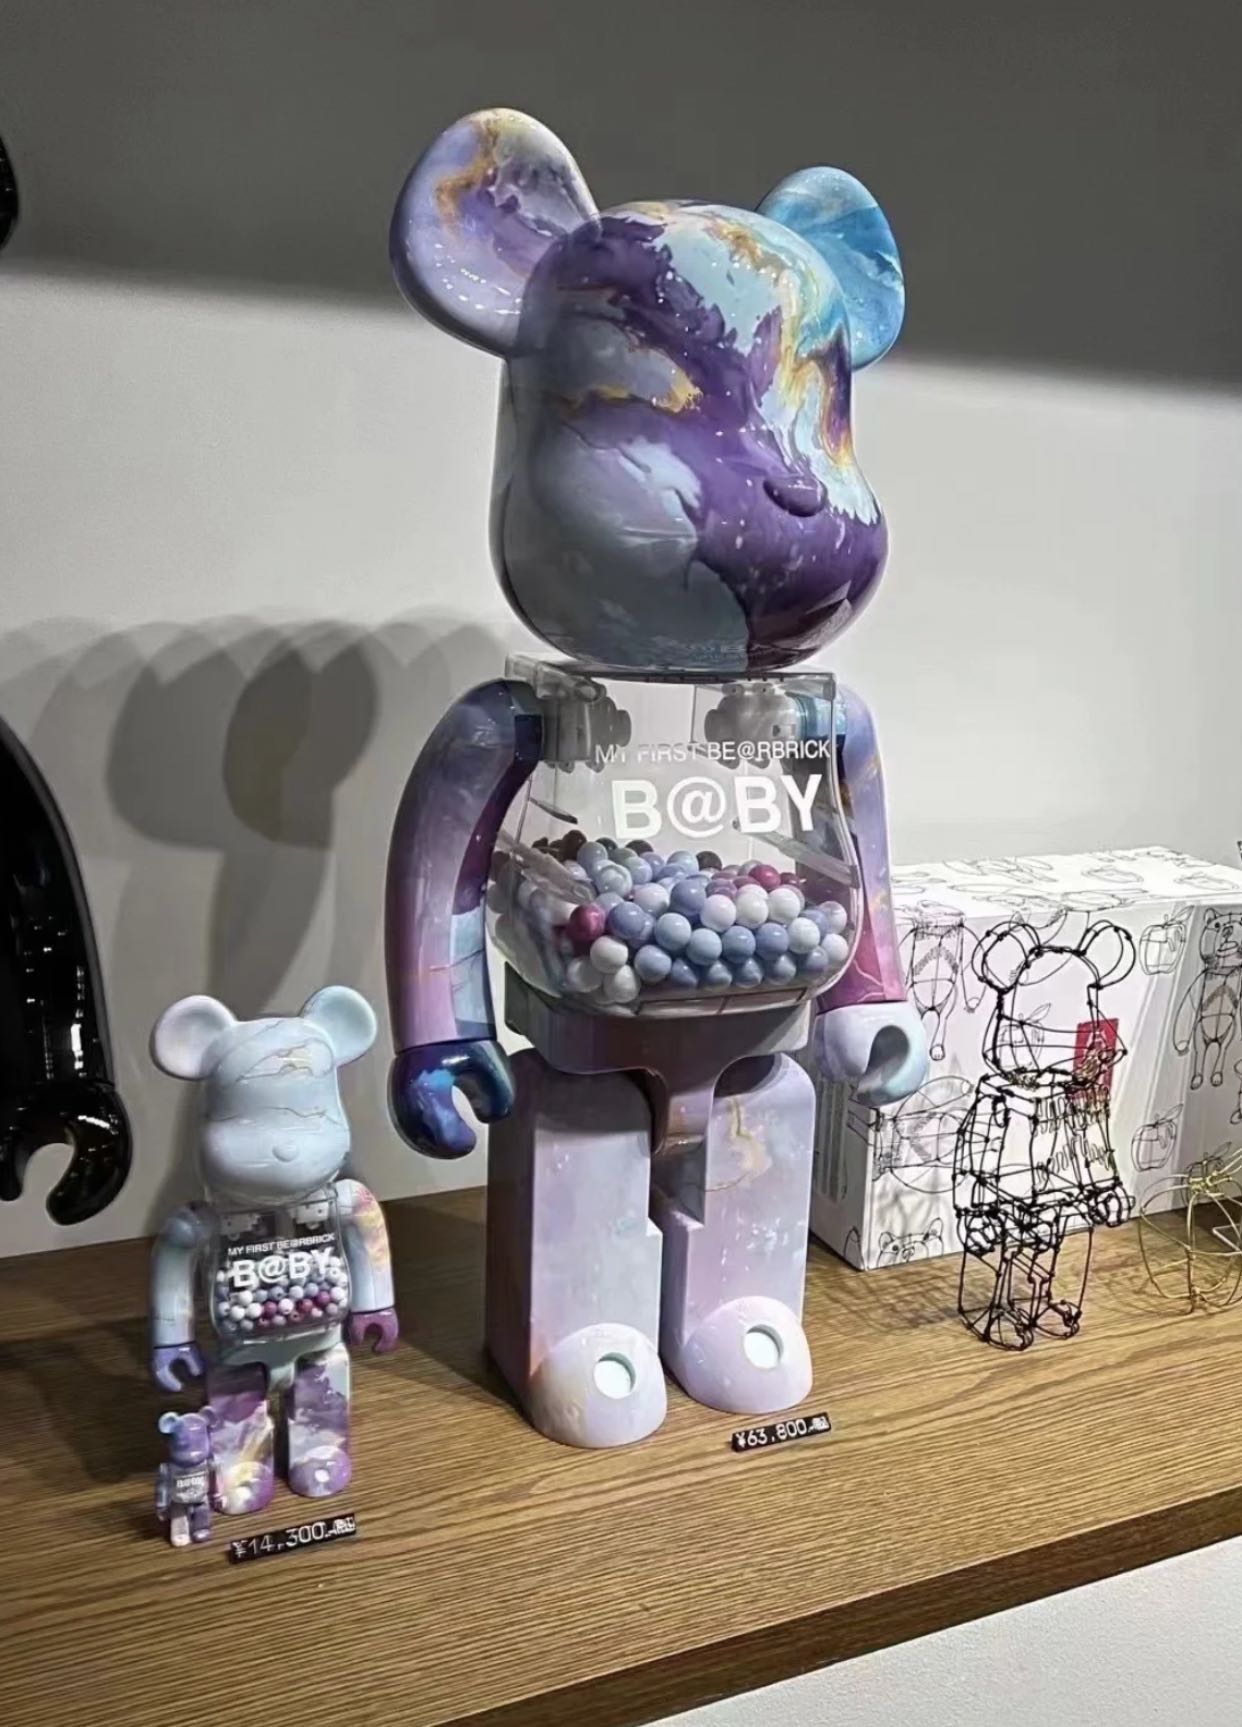 MY FIRST BE@RBRICK B@BY MARBLE 1000％ | www.fitwellind.com